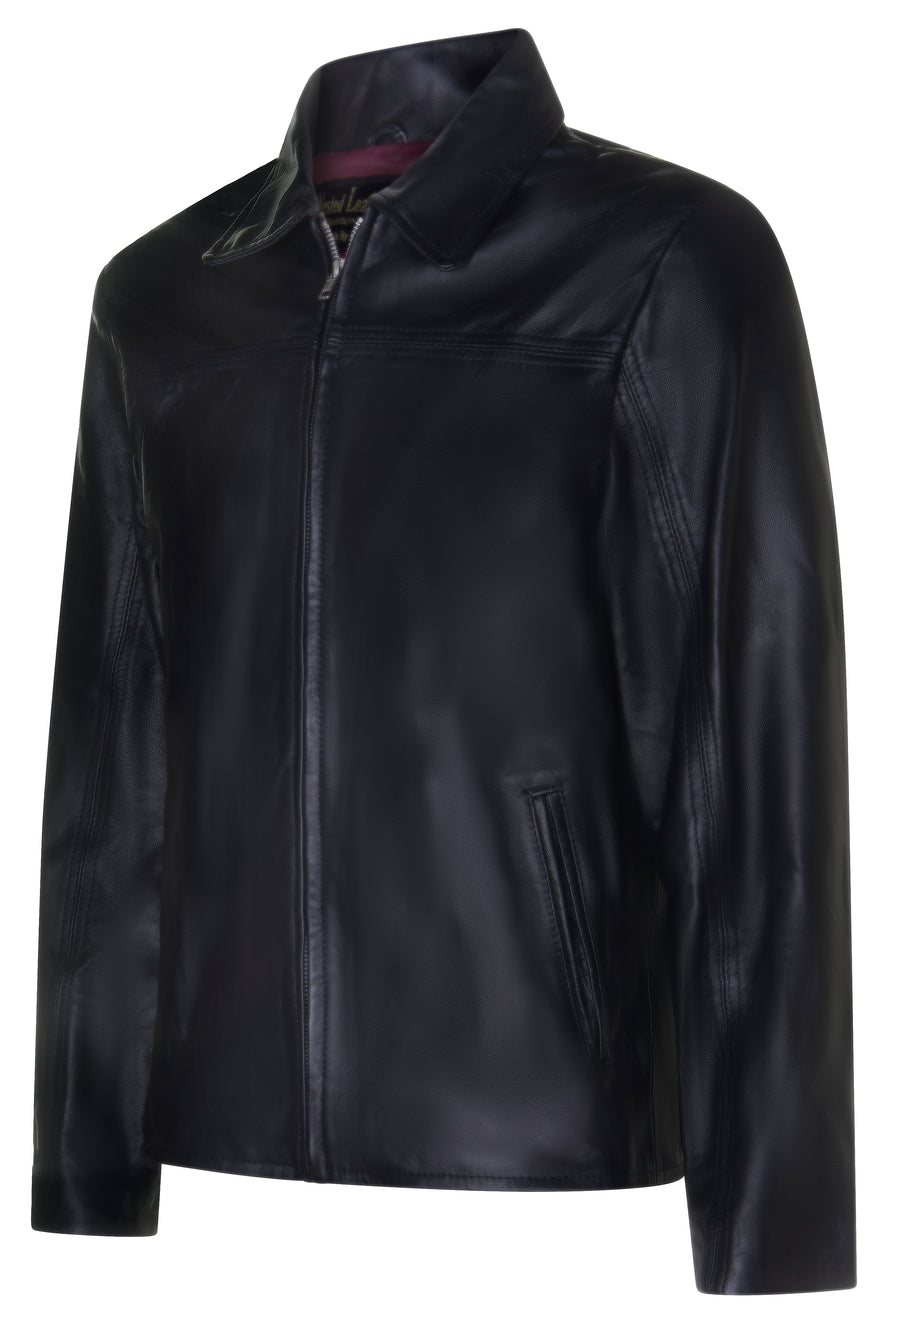 Soft Lambskin Leather Layer Cake Style Jacket with Red Insides